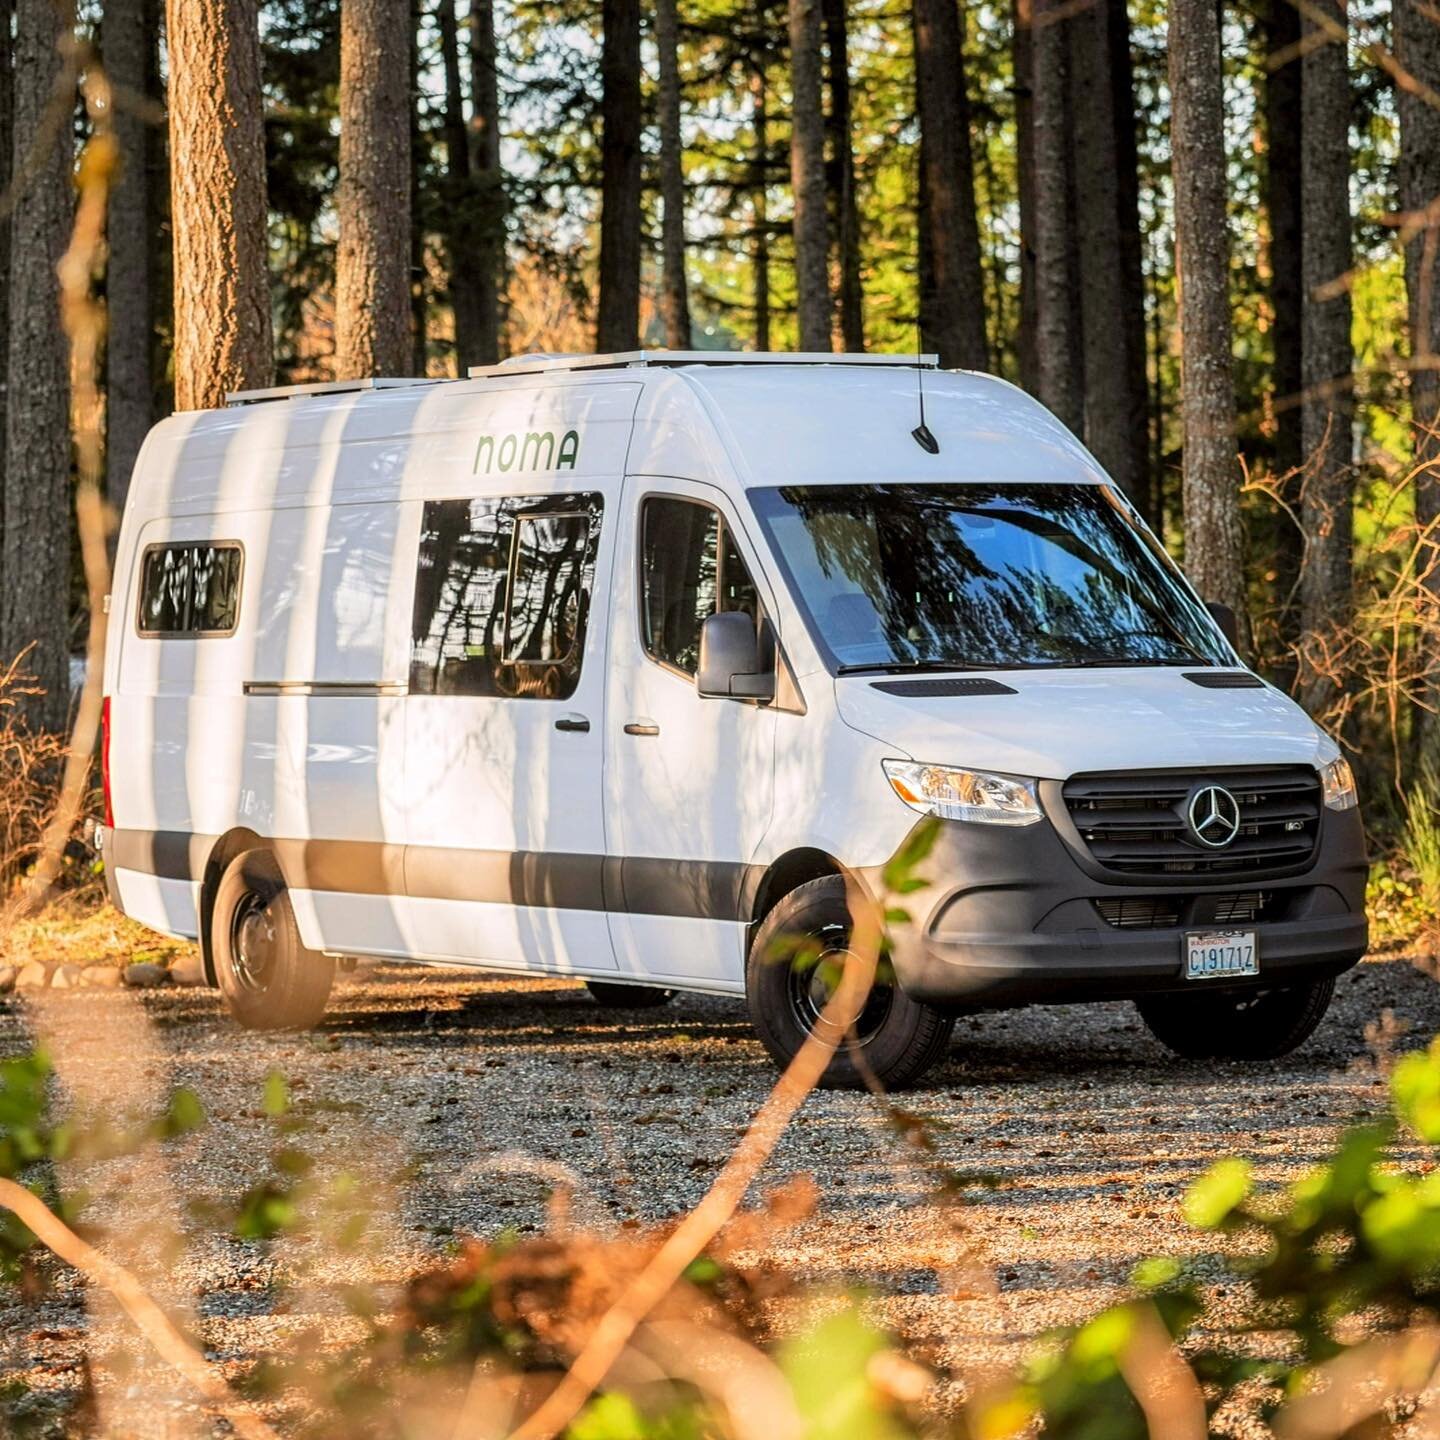 Embrace the Great Outdoors and Unleash Your Adventurous Spirit! 🌲🚐✨

There's a whole world waiting to be discovered beyond the confines of our screens. It's time to step outside, breathe in the fresh air, and immerse yourself in the wonders of natu